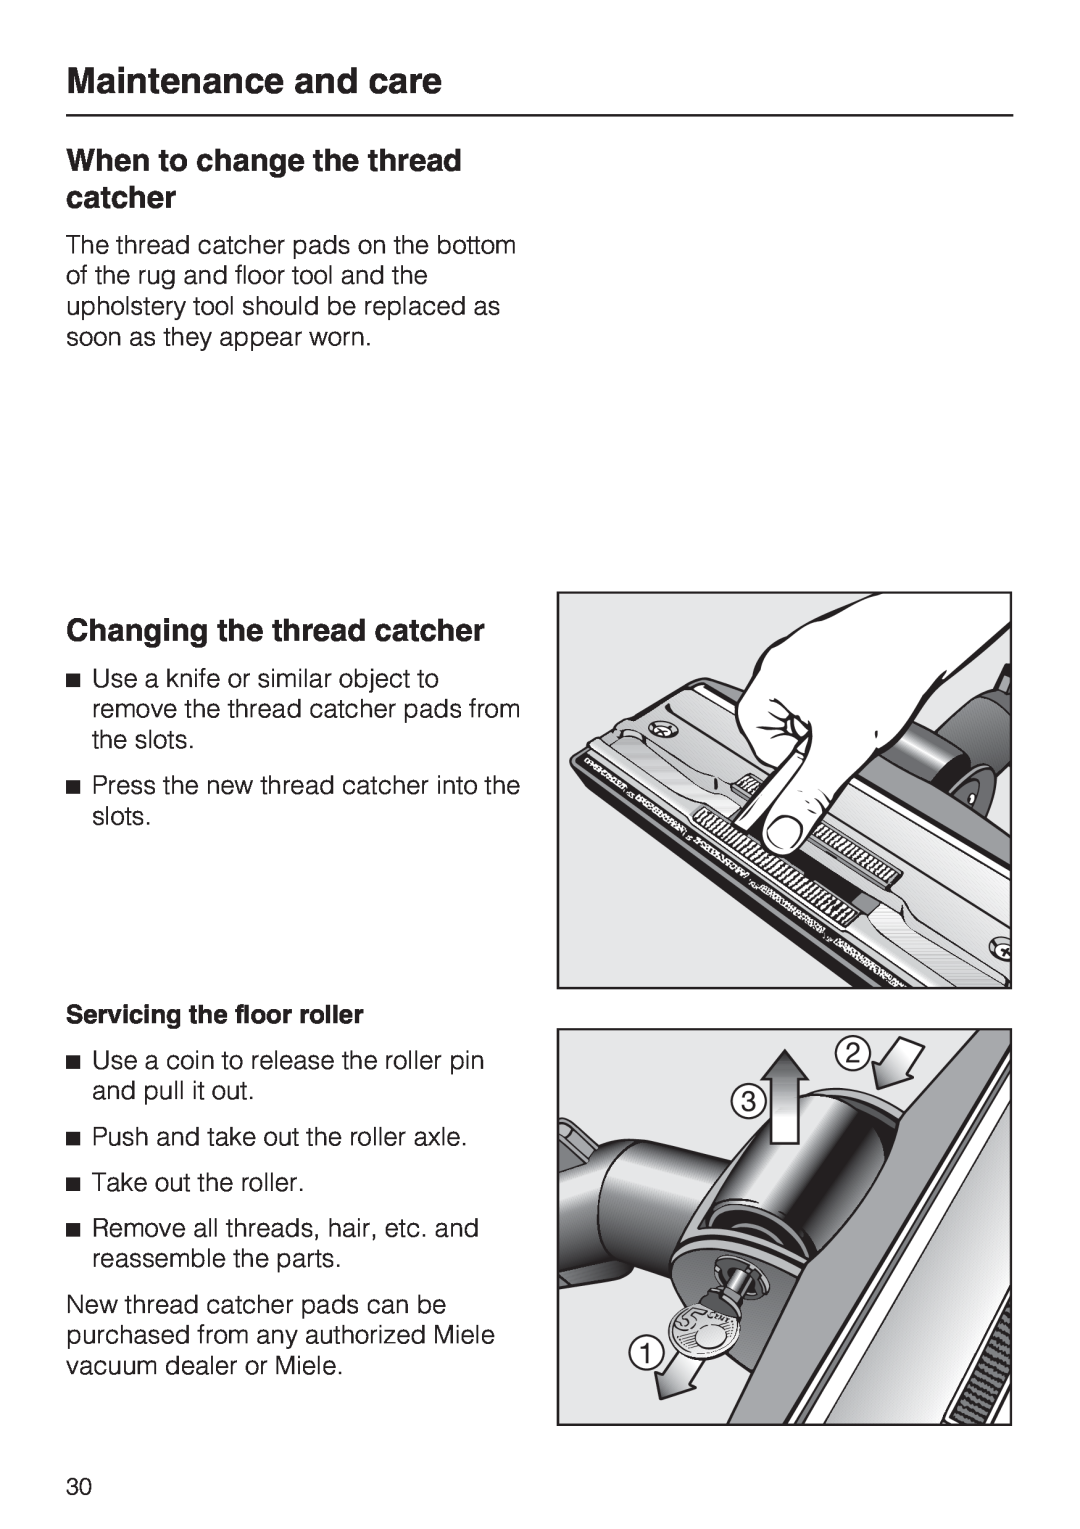 Miele S 5980 operating instructions When to change the thread catcher, Changing the thread catcher, Maintenance and care 